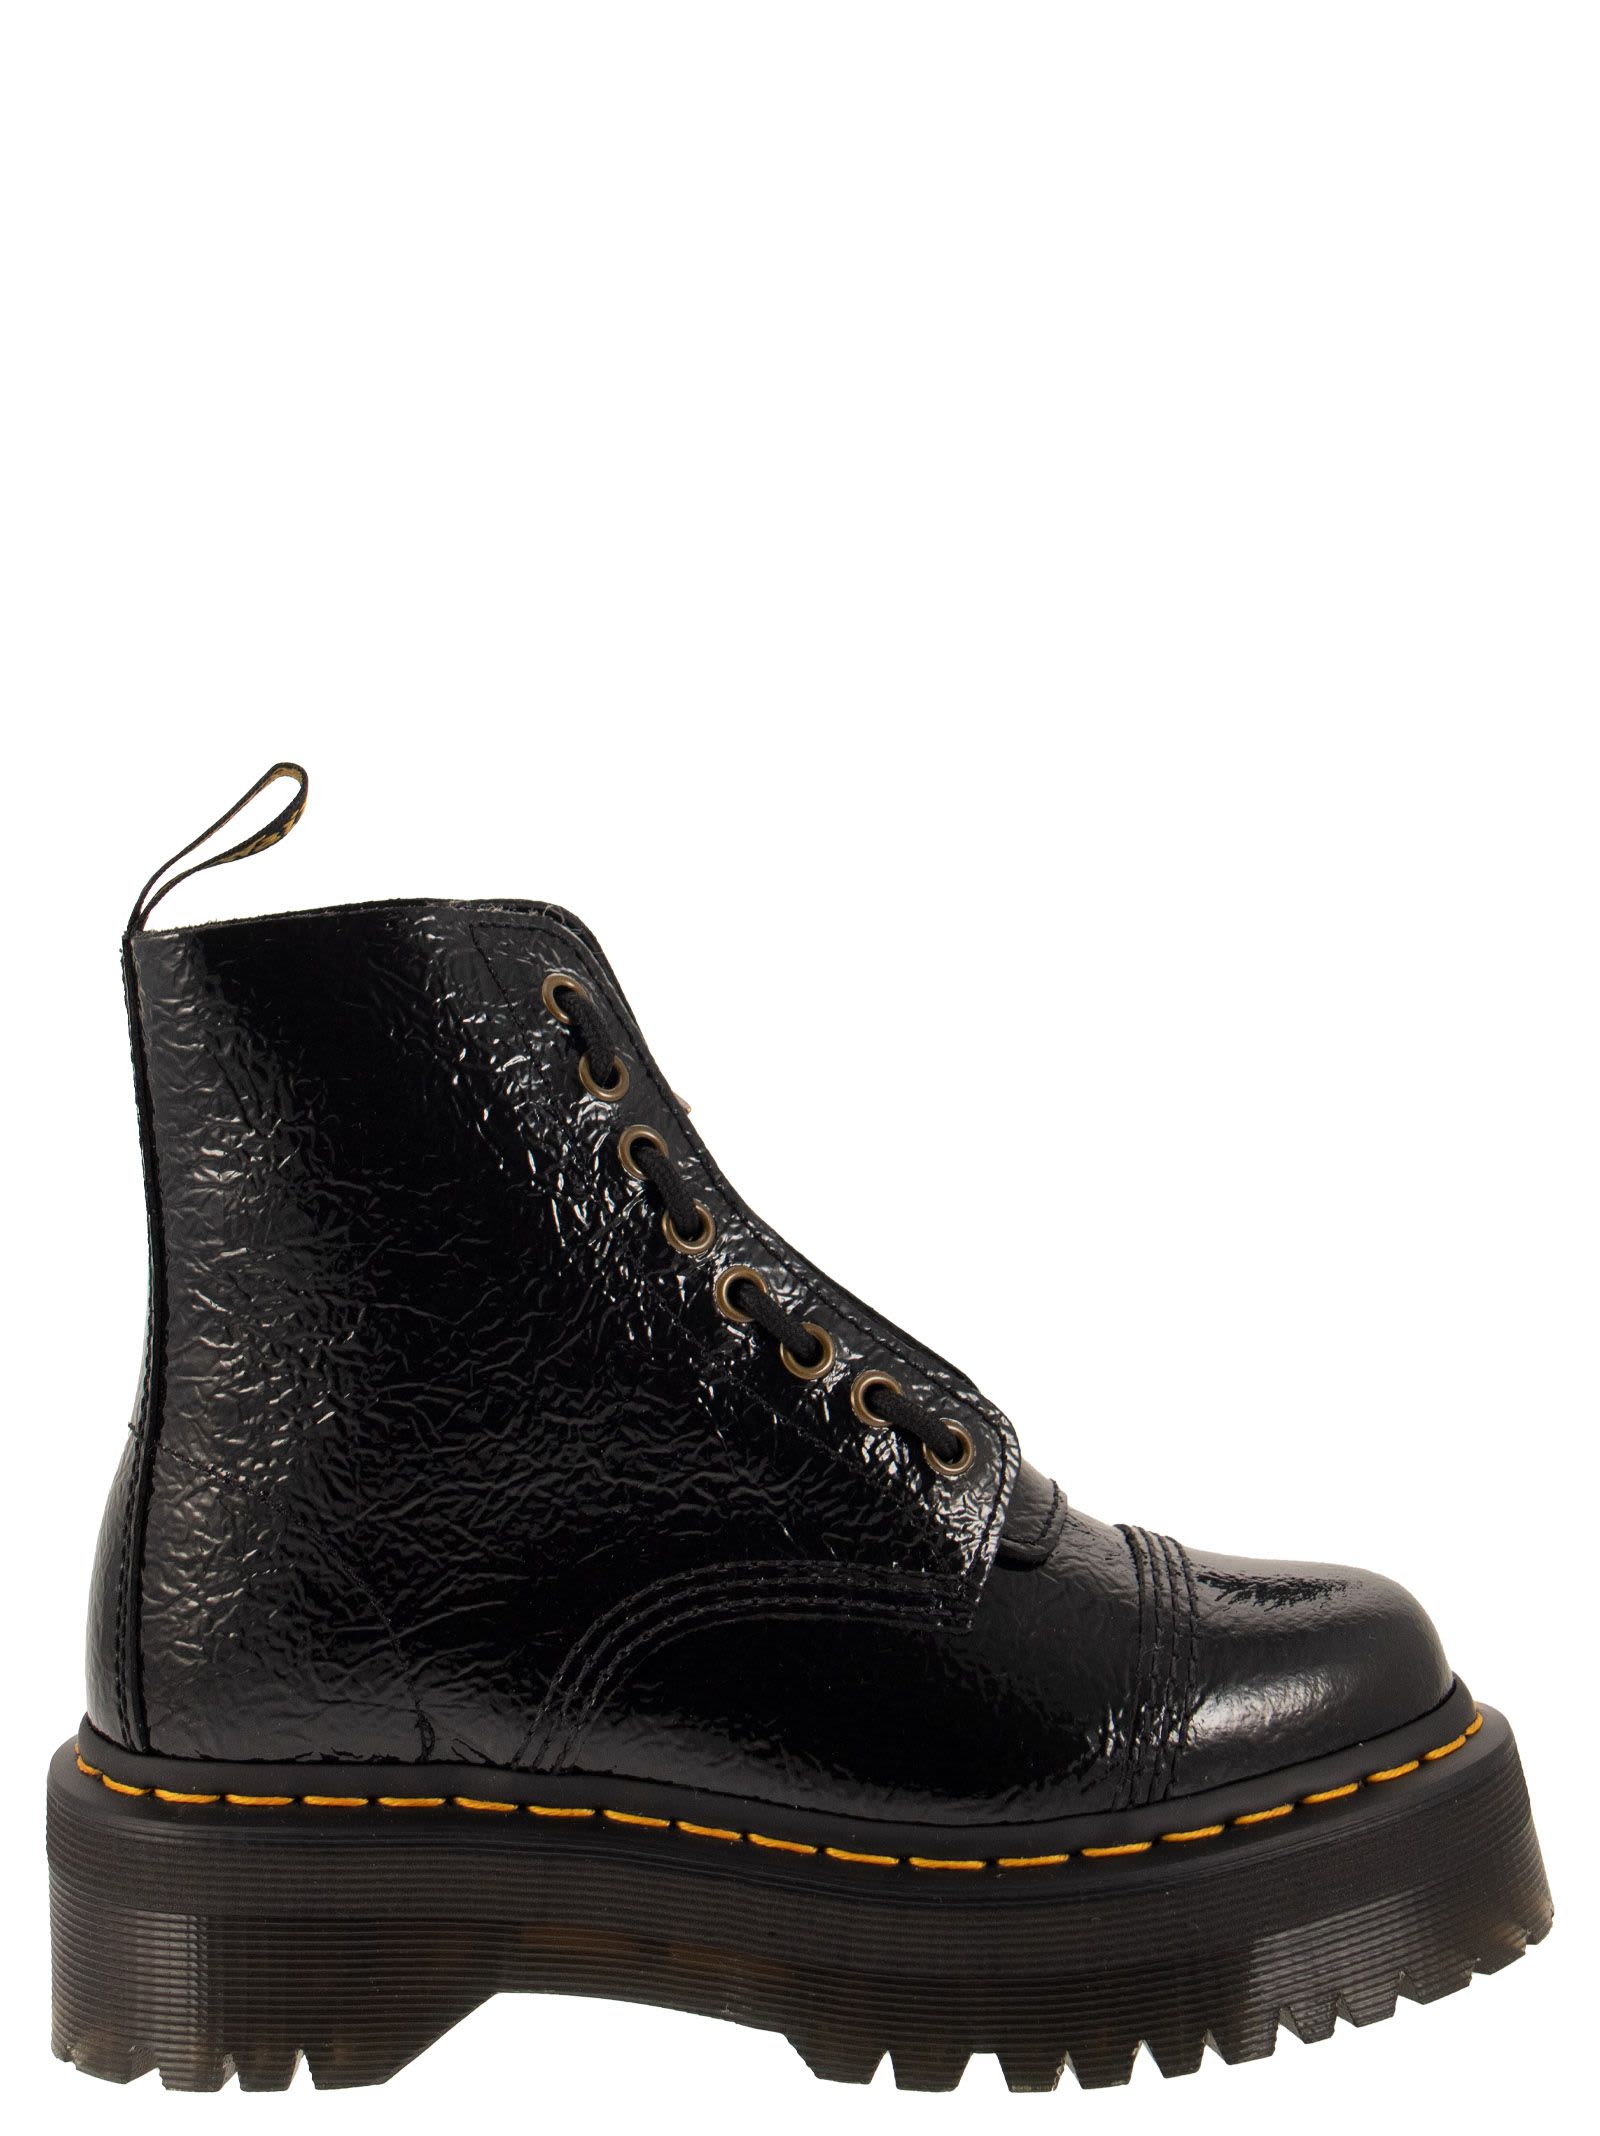 Dr. Martens Sinclair - Patent Leather Ankle Boot